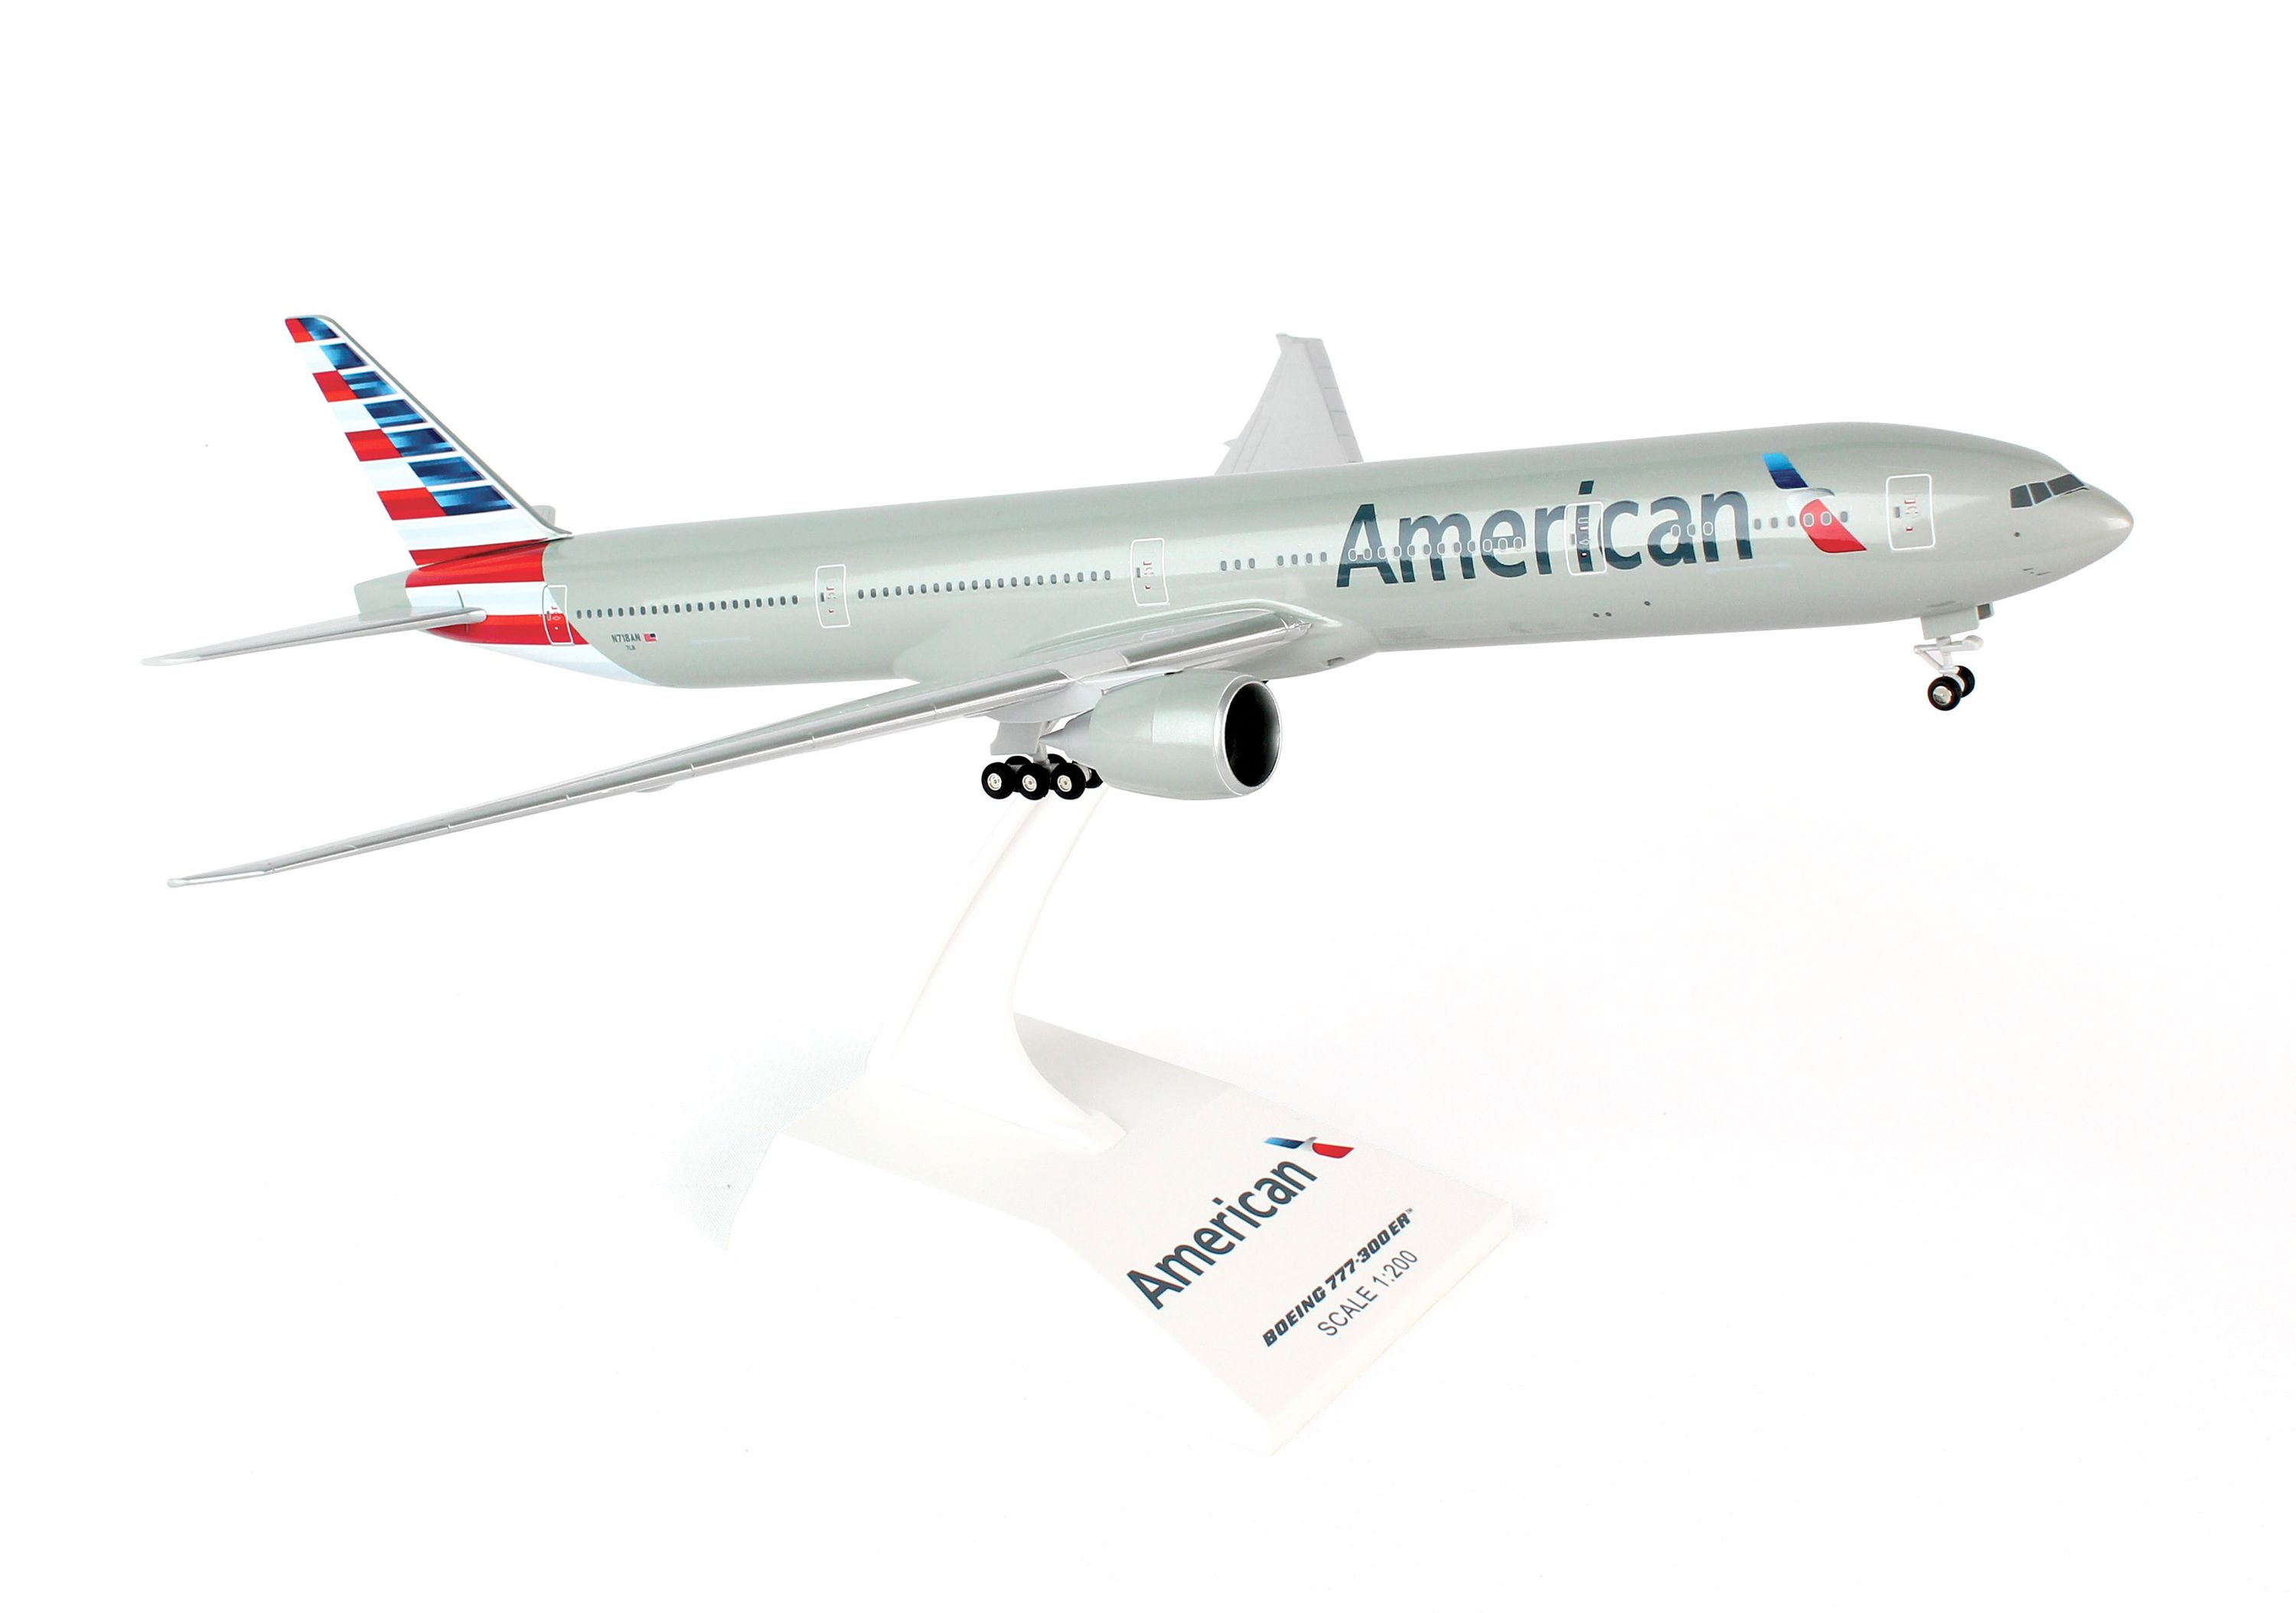 SkyMarks Flugzeugmodell American Airlines Boeing 777-300 Maßstab 1:200